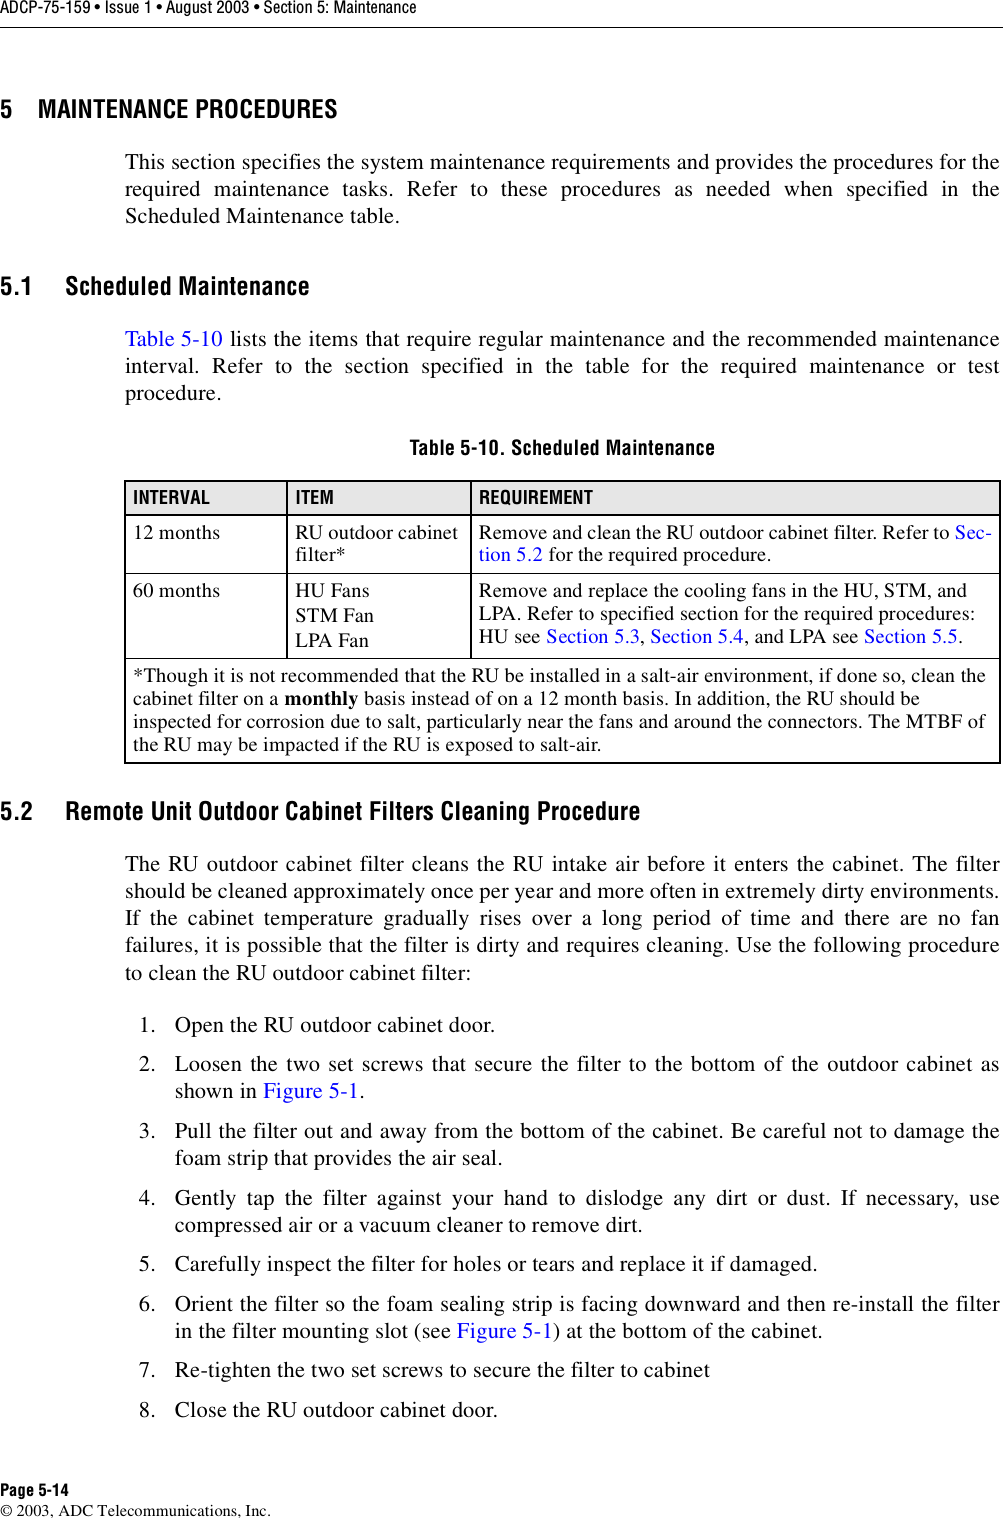 ADCP-75-159 • Issue 1 • August 2003 • Section 5: MaintenancePage 5-14© 2003, ADC Telecommunications, Inc.5 MAINTENANCE PROCEDURESThis section specifies the system maintenance requirements and provides the procedures for therequired maintenance tasks. Refer to these procedures as needed when specified in theScheduled Maintenance table. 5.1 Scheduled MaintenanceTable 5-10 lists the items that require regular maintenance and the recommended maintenanceinterval. Refer to the section specified in the table for the required maintenance or testprocedure. 5.2 Remote Unit Outdoor Cabinet Filters Cleaning ProcedureThe RU outdoor cabinet filter cleans the RU intake air before it enters the cabinet. The filtershould be cleaned approximately once per year and more often in extremely dirty environments.If the cabinet temperature gradually rises over a long period of time and there are no fanfailures, it is possible that the filter is dirty and requires cleaning. Use the following procedureto clean the RU outdoor cabinet filter: 1. Open the RU outdoor cabinet door. 2. Loosen the two set screws that secure the filter to the bottom of the outdoor cabinet asshown in Figure 5-1. 3. Pull the filter out and away from the bottom of the cabinet. Be careful not to damage thefoam strip that provides the air seal. 4. Gently tap the filter against your hand to dislodge any dirt or dust. If necessary, usecompressed air or a vacuum cleaner to remove dirt. 5. Carefully inspect the filter for holes or tears and replace it if damaged. 6. Orient the filter so the foam sealing strip is facing downward and then re-install the filterin the filter mounting slot (see Figure 5-1) at the bottom of the cabinet. 7. Re-tighten the two set screws to secure the filter to cabinet 8. Close the RU outdoor cabinet door. Table 5-10. Scheduled MaintenanceINTERVAL ITEM REQUIREMENT12 months RU outdoor cabinet filter* Remove and clean the RU outdoor cabinet filter. Refer to Sec-tion 5.2 for the required procedure. 60 months HU FansSTM FanLPA FanRemove and replace the cooling fans in the HU, STM, and LPA. Refer to specified section for the required procedures: HU see Section 5.3, Section 5.4, and LPA see Section 5.5. *Though it is not recommended that the RU be installed in a salt-air environment, if done so, clean the cabinet filter on a monthly basis instead of on a 12 month basis. In addition, the RU should be inspected for corrosion due to salt, particularly near the fans and around the connectors. The MTBF of the RU may be impacted if the RU is exposed to salt-air. 